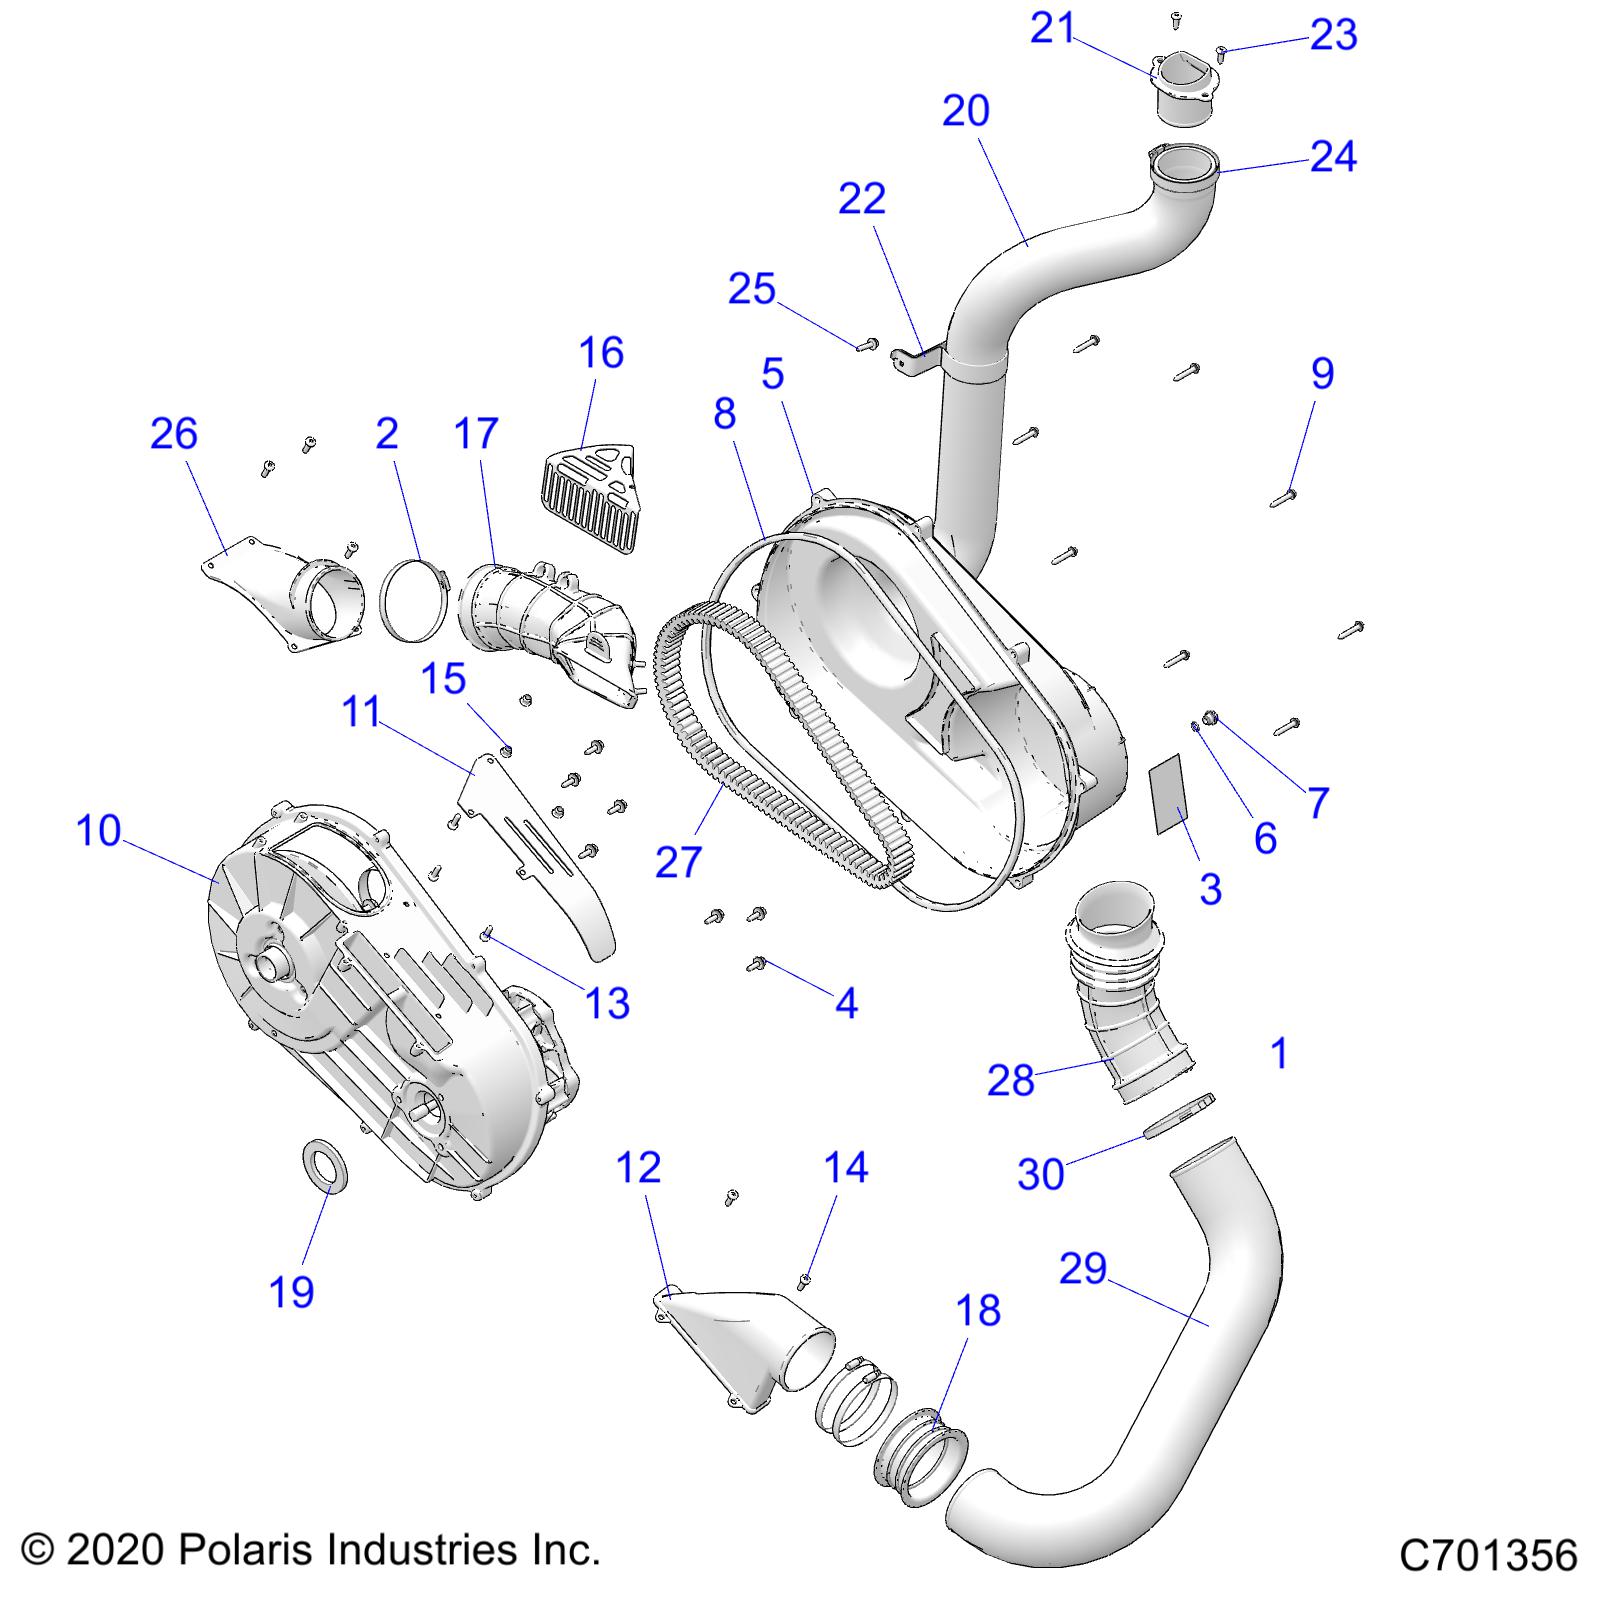 Part Number : 5414580 CLUTCH HOSE  AIR INLET